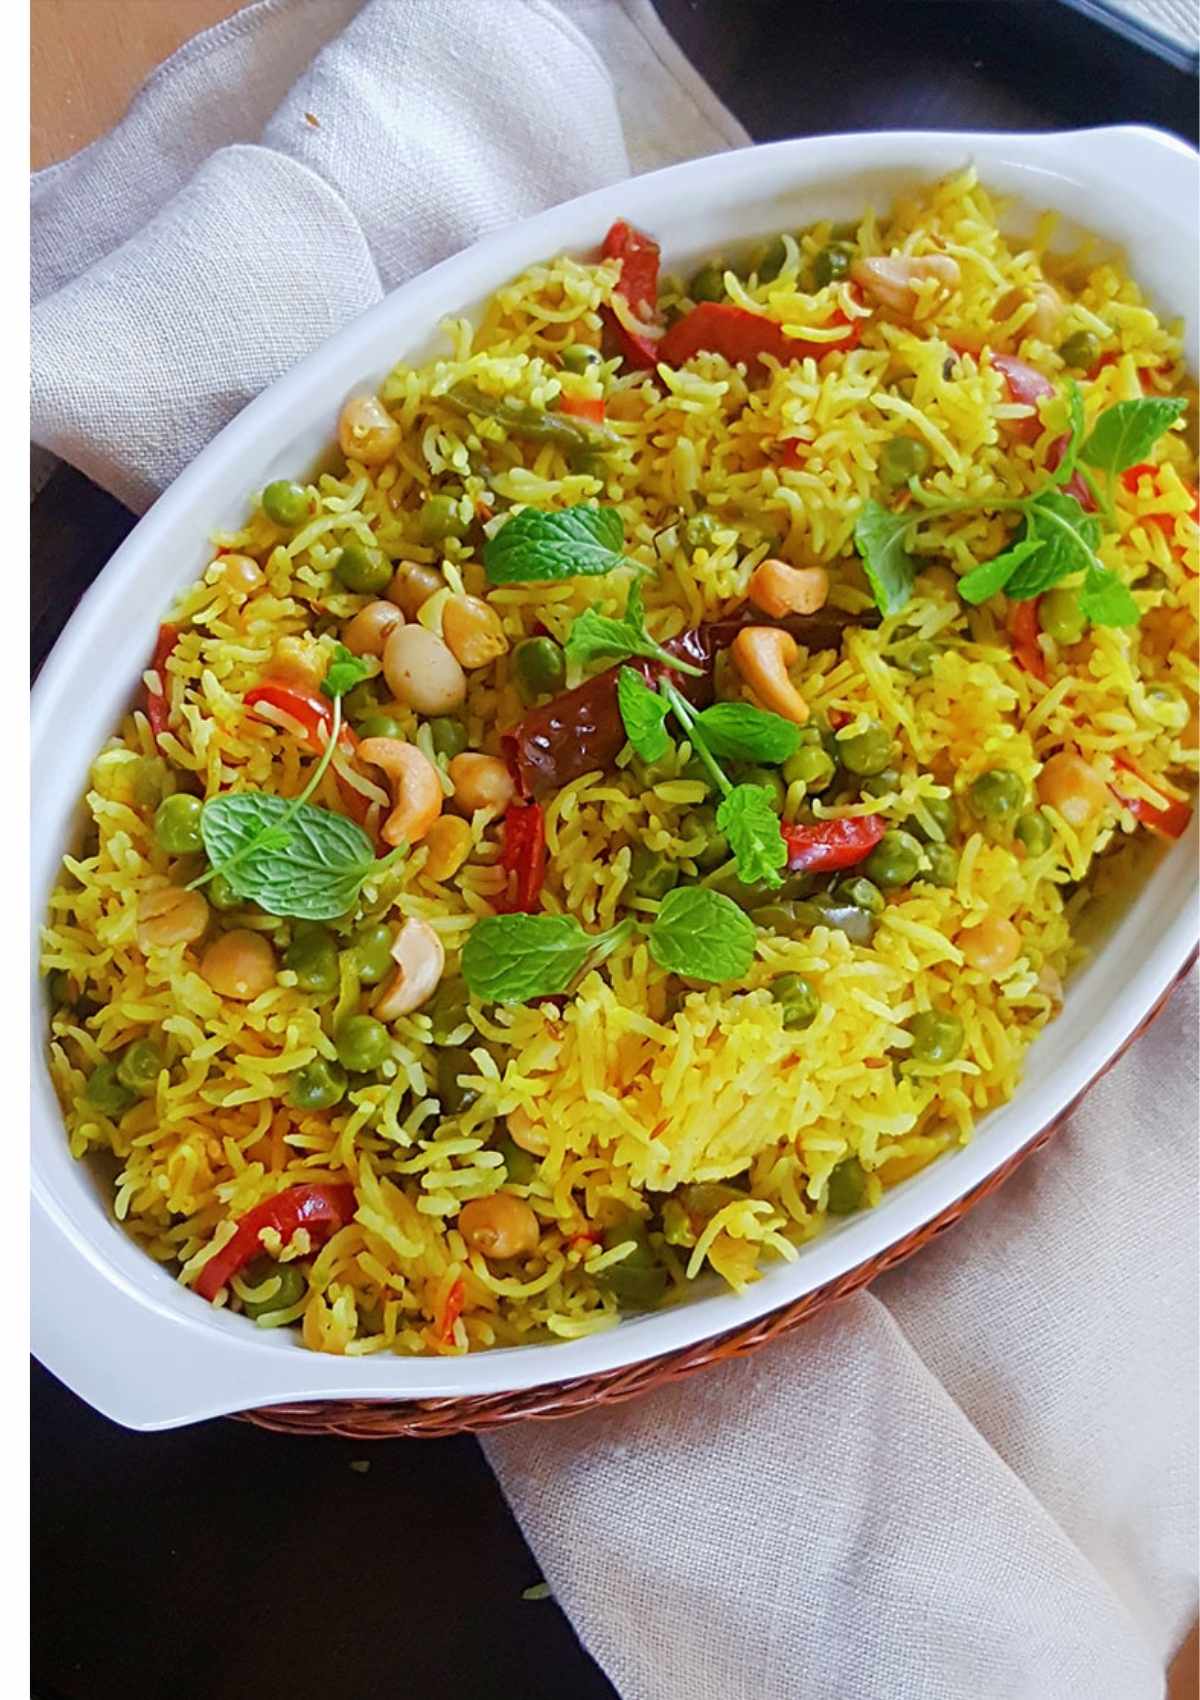 Spicy vegetable rice served in a serving dish and are topped with cashew nuts and green mint leaves